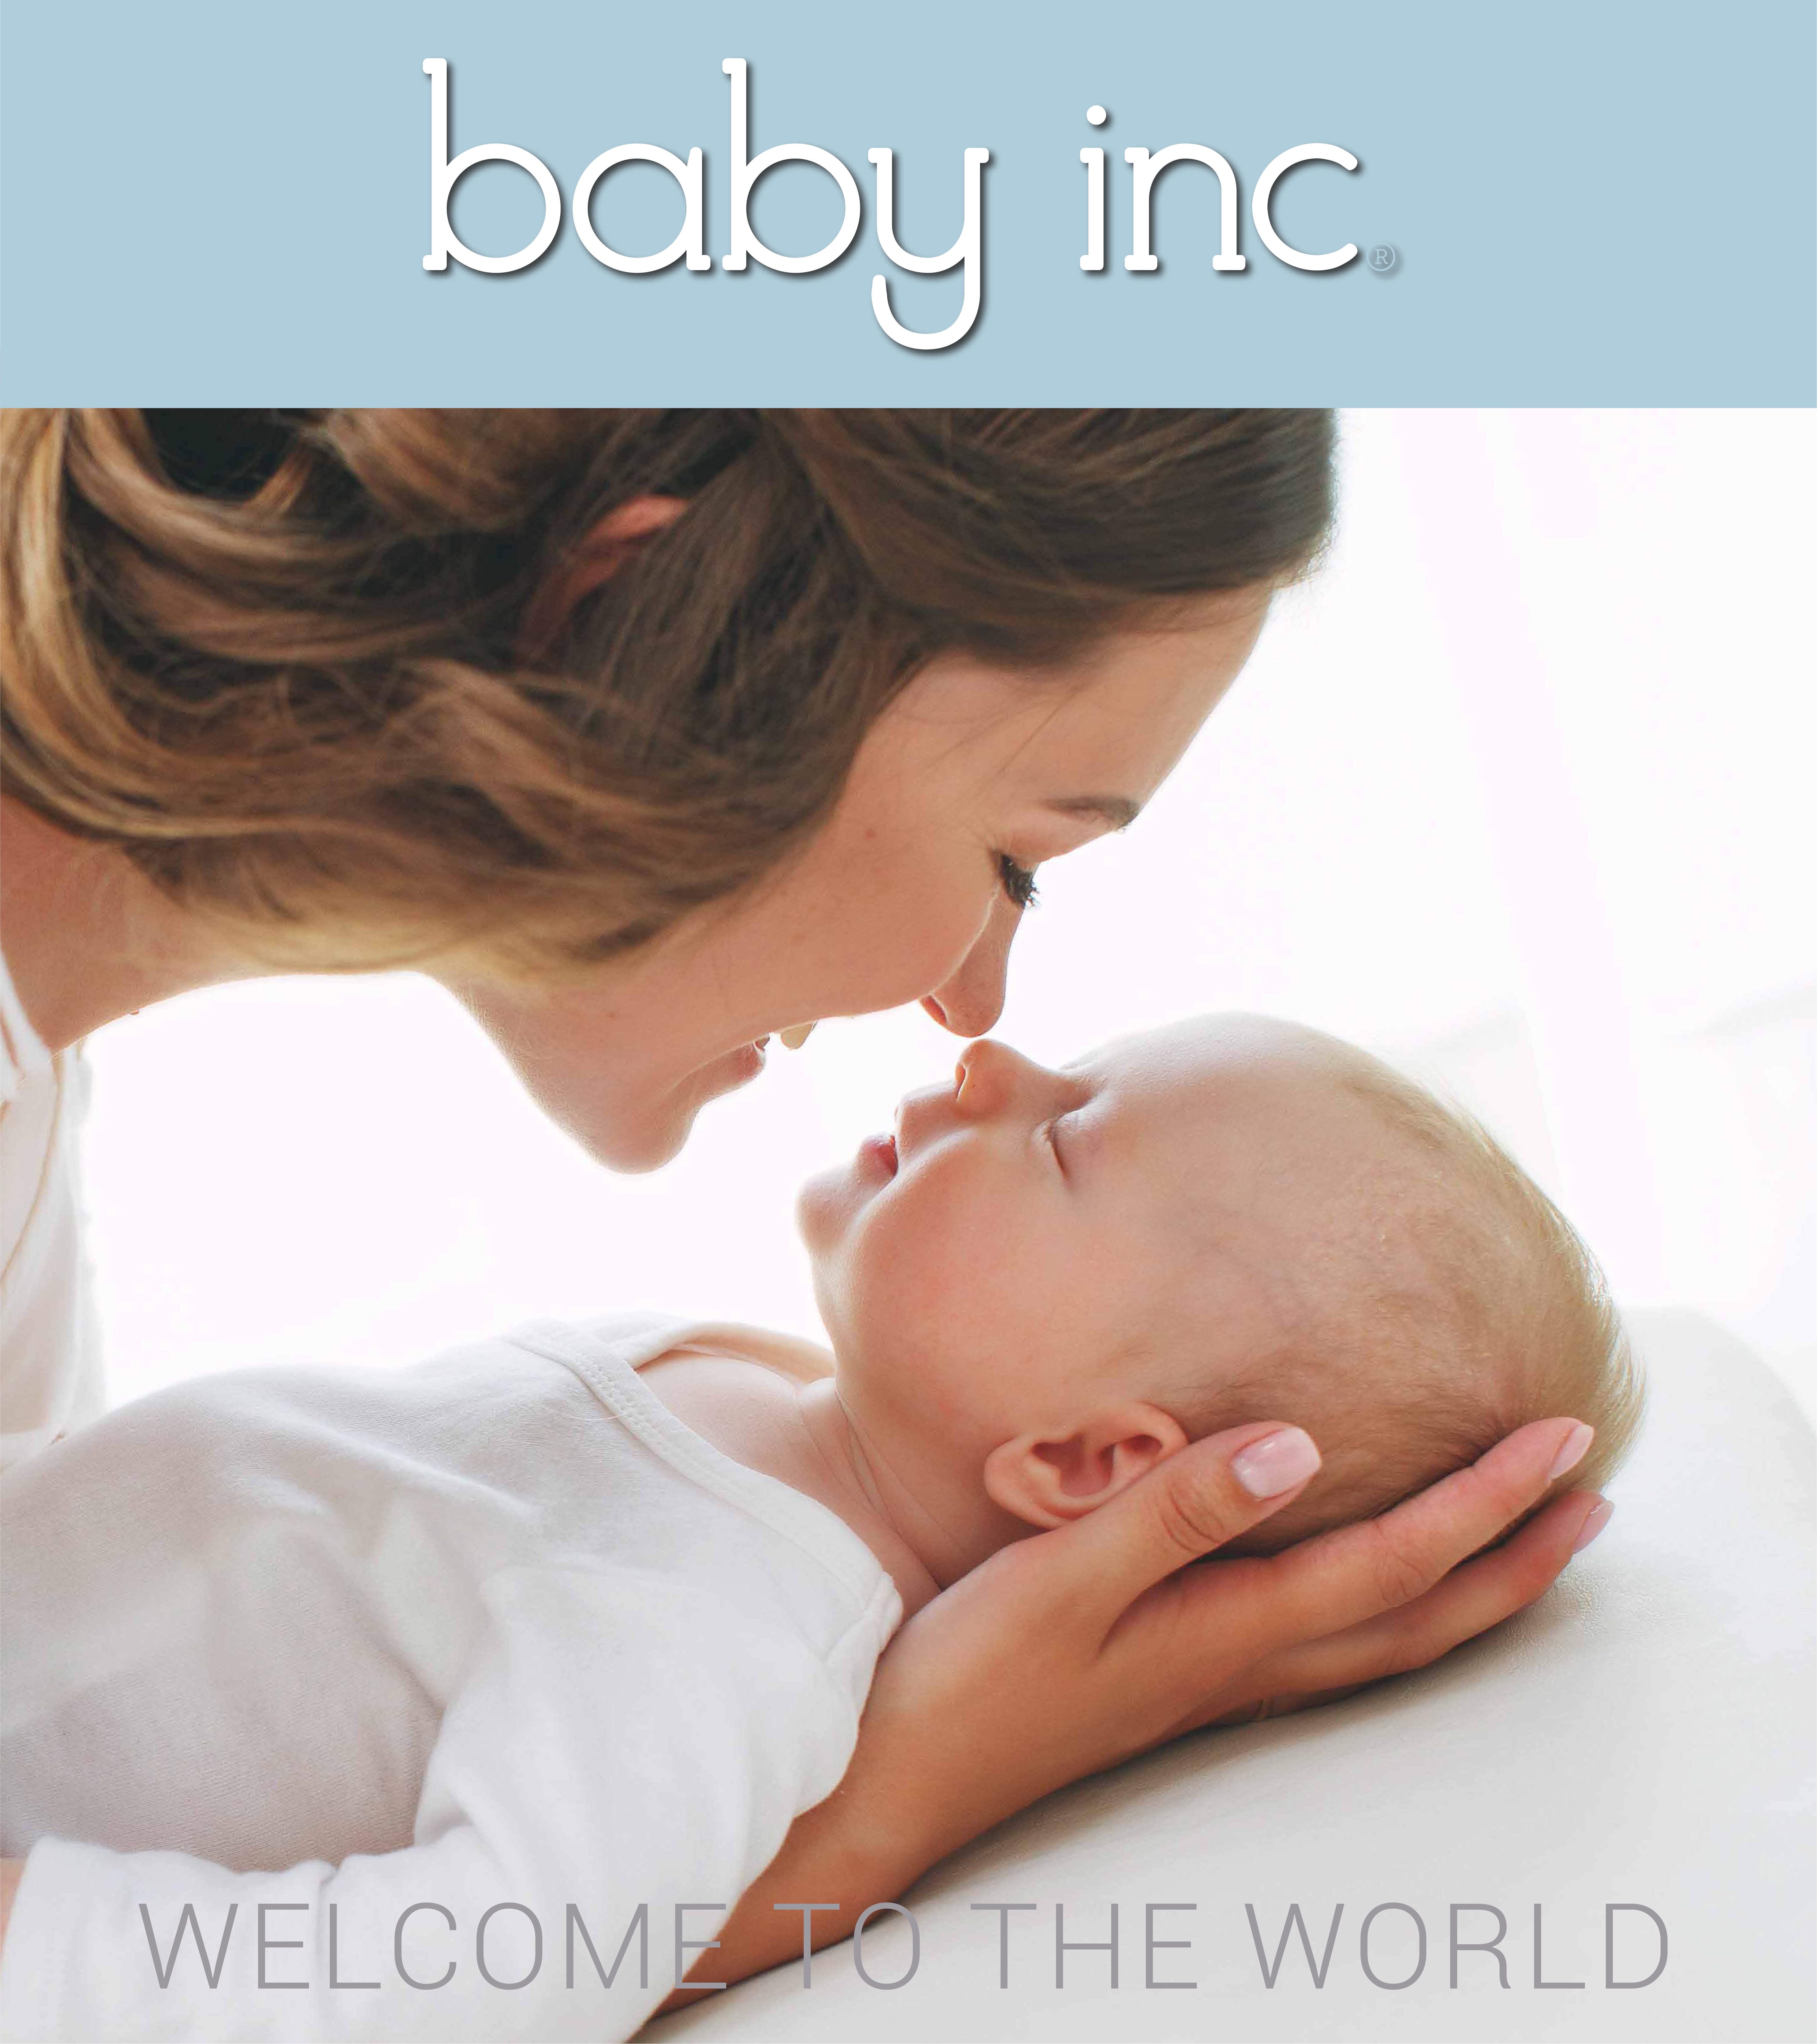 Blancos-y-Blancos-BABY-INC-Welcome-to-the-world-COVER.jpg